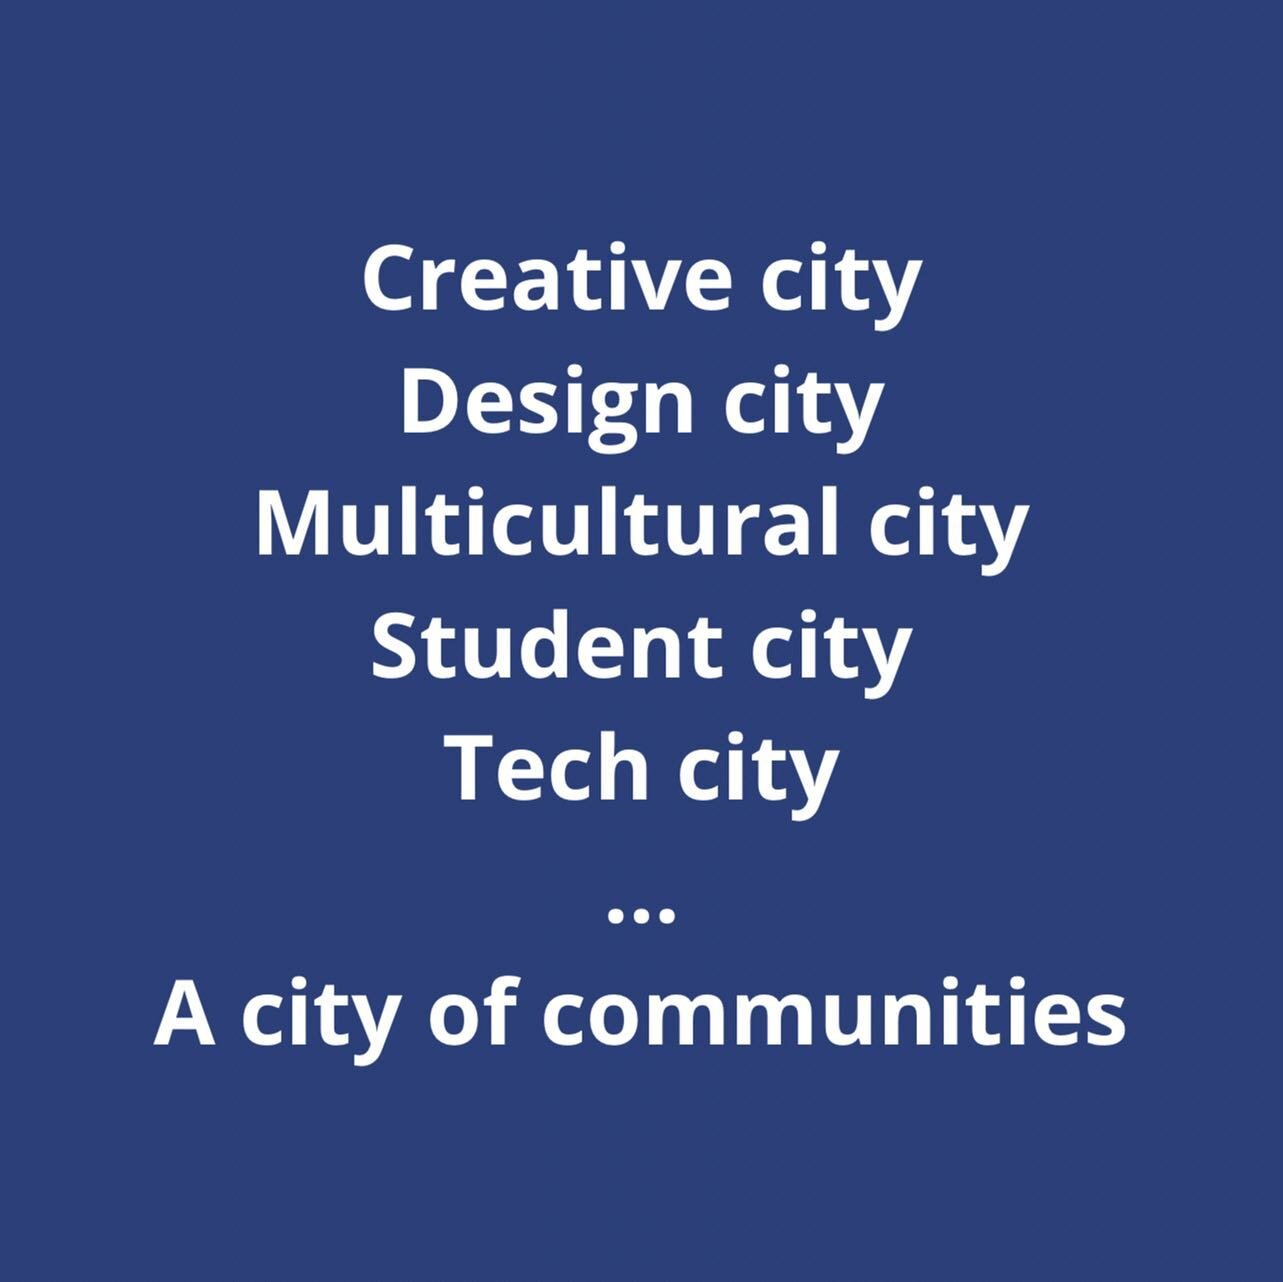 Our city is much more than one line. It&rsquo;s made up of so many diverse and vibrant communities.

It&rsquo;s a creative city, design city, multicultural city, student city, tech city and more. 

The success of communities is what makes our city vi